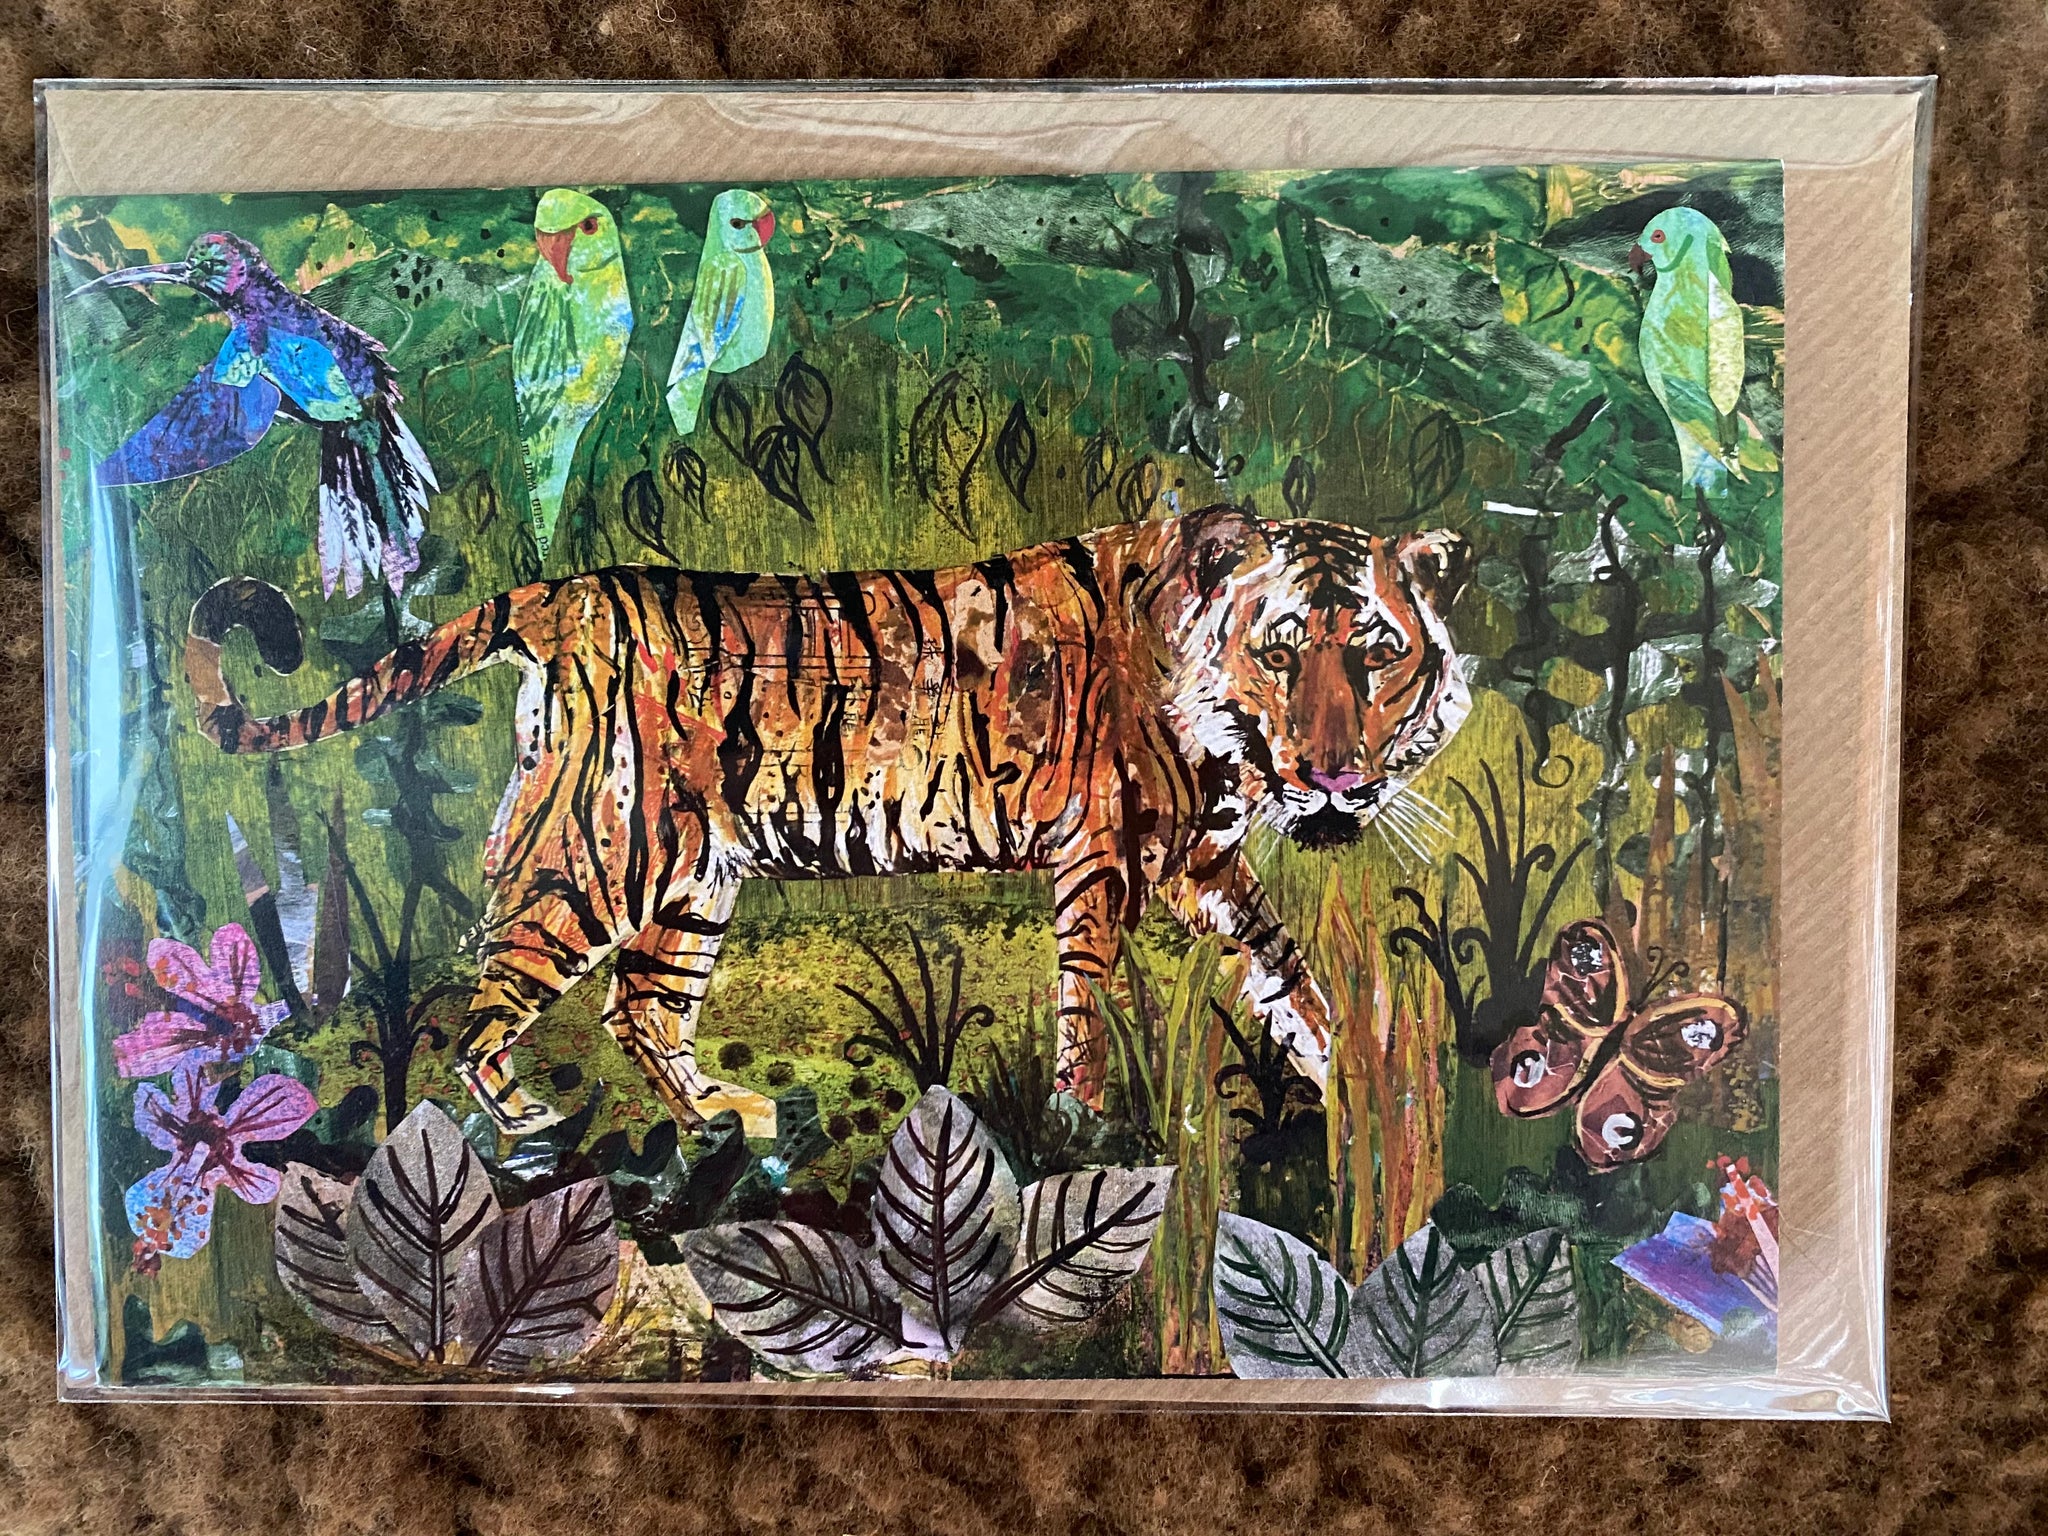 A5 “Tiger and the Parakeets” Blank Greeting card.